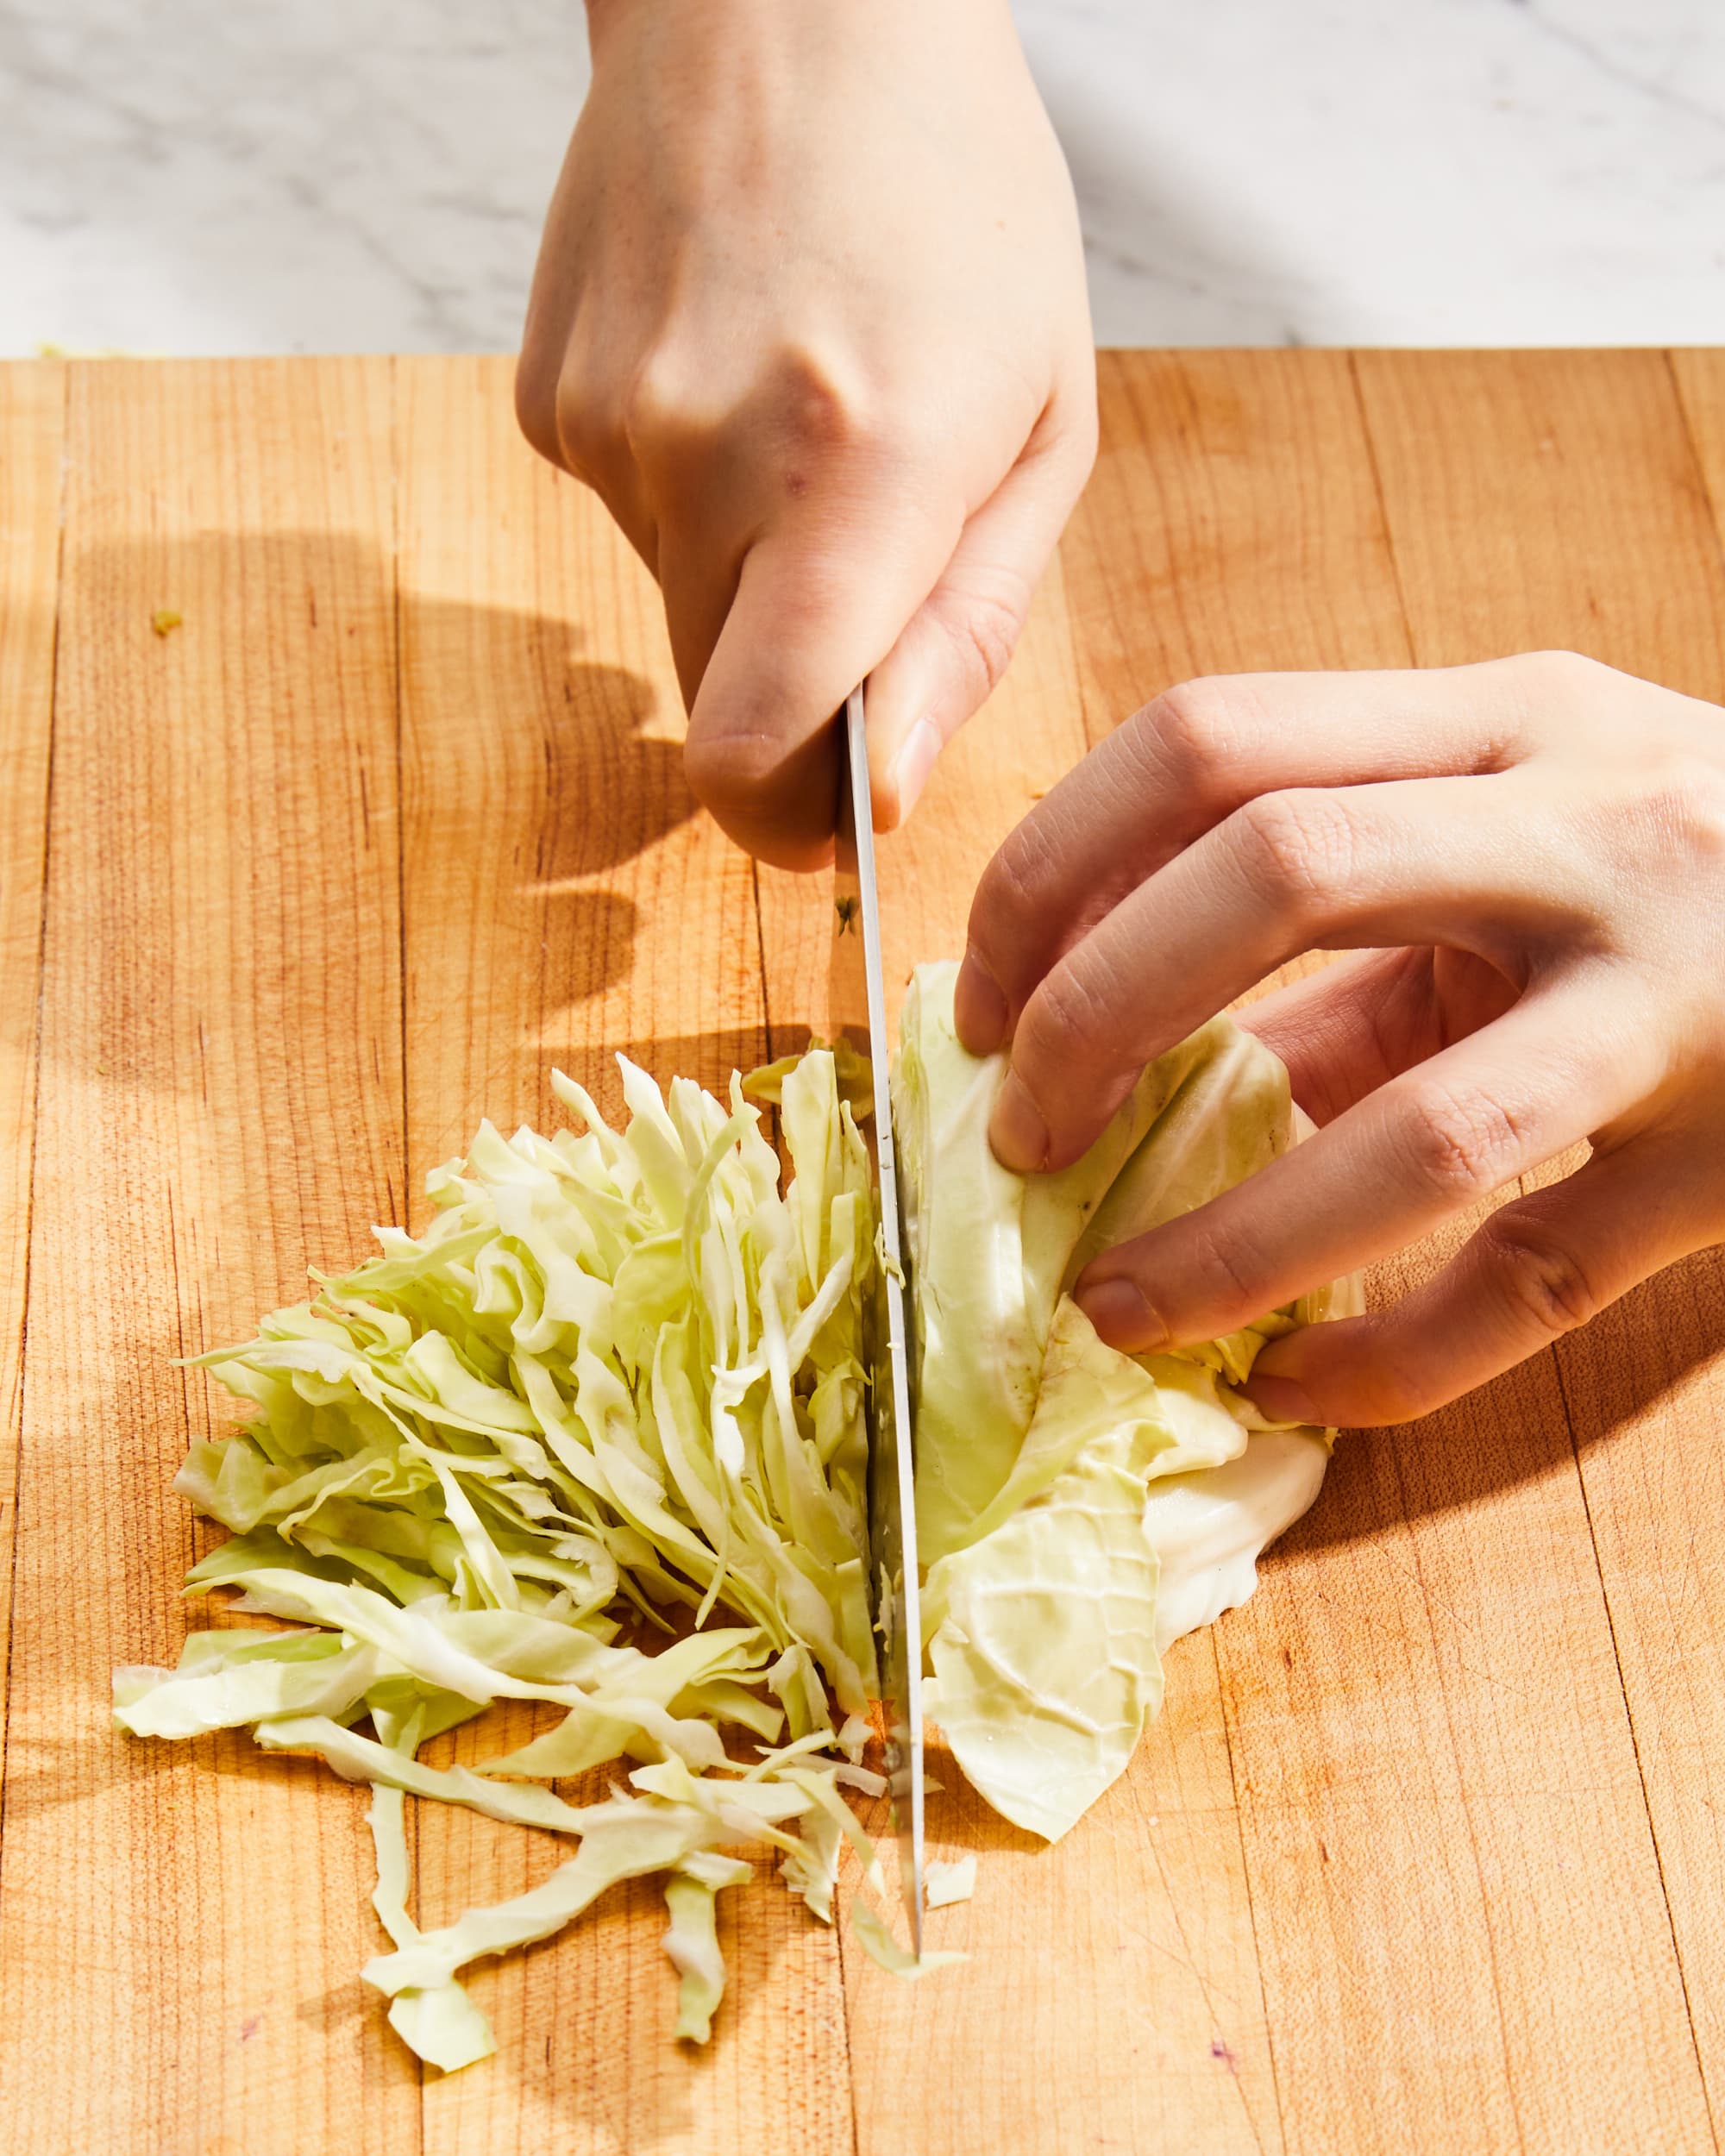 Compact Wooden Cabbage Shredder Slicer with Hand Guard for Finely Cut  Sauerkraut and Coleslaw